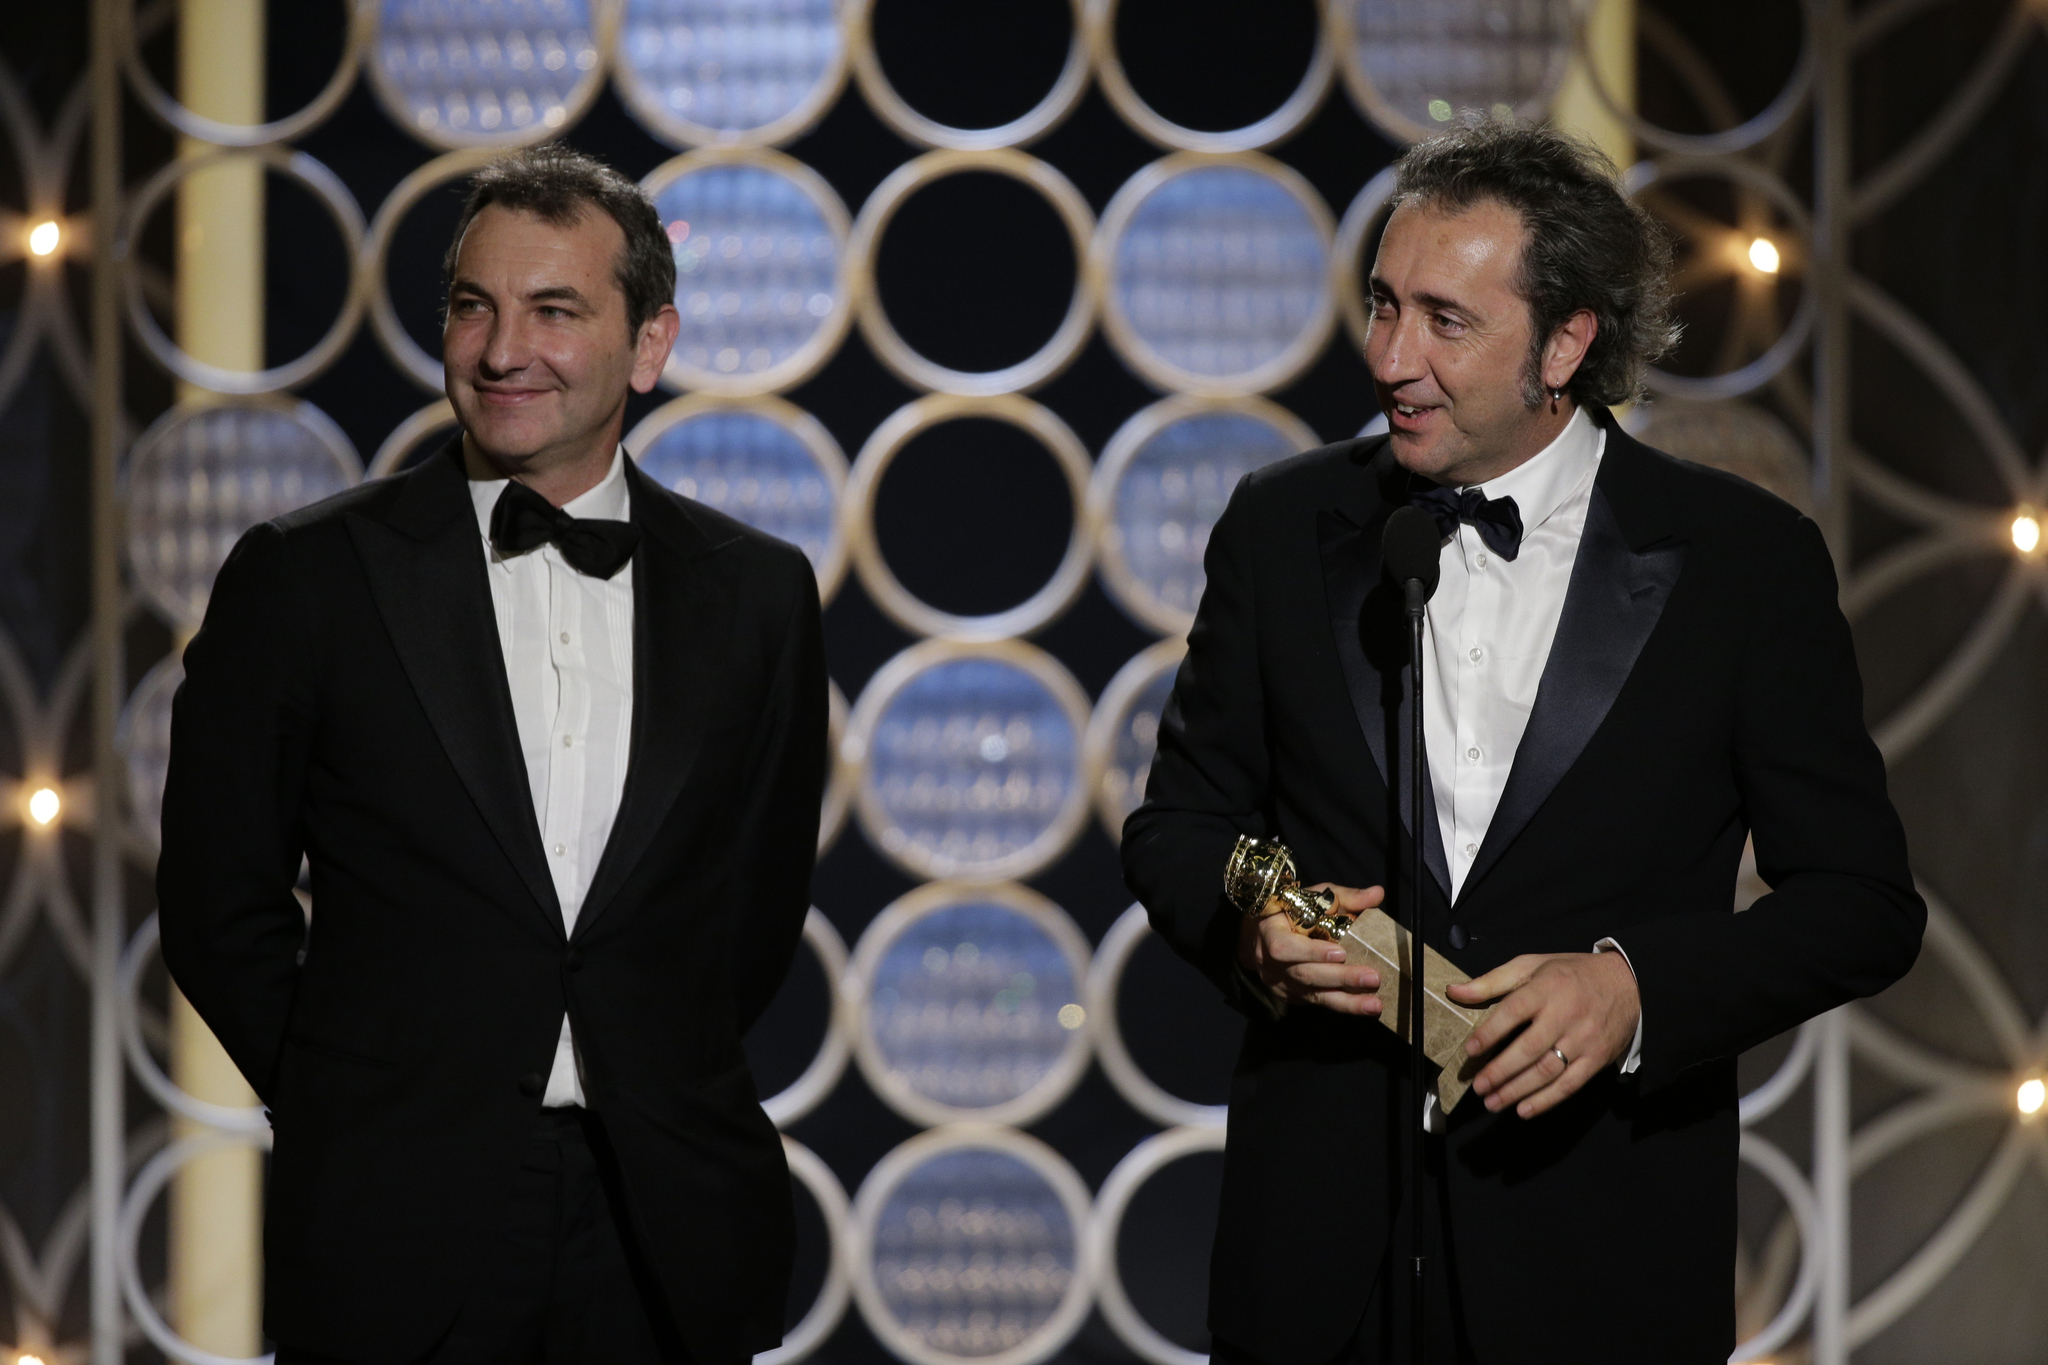 Nicola Giuliano and Paolo Sorrentino at event of 71st Golden Globe Awards (2014)